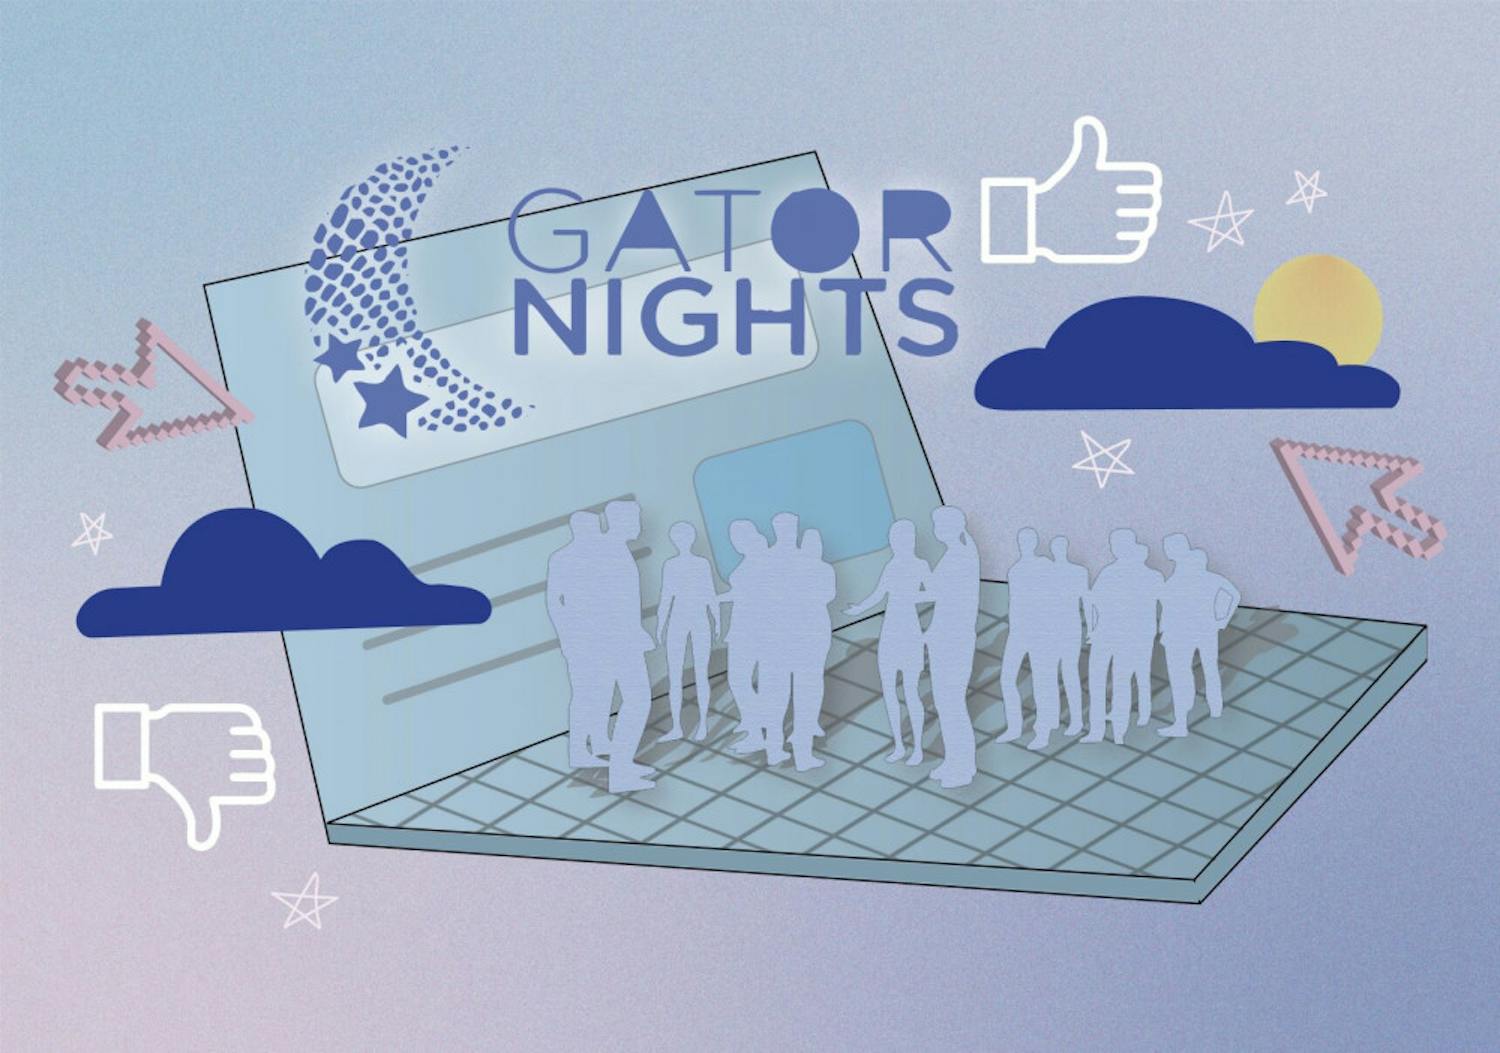 GatorNights continues to host free events for UF students during the Summer
&nbsp;